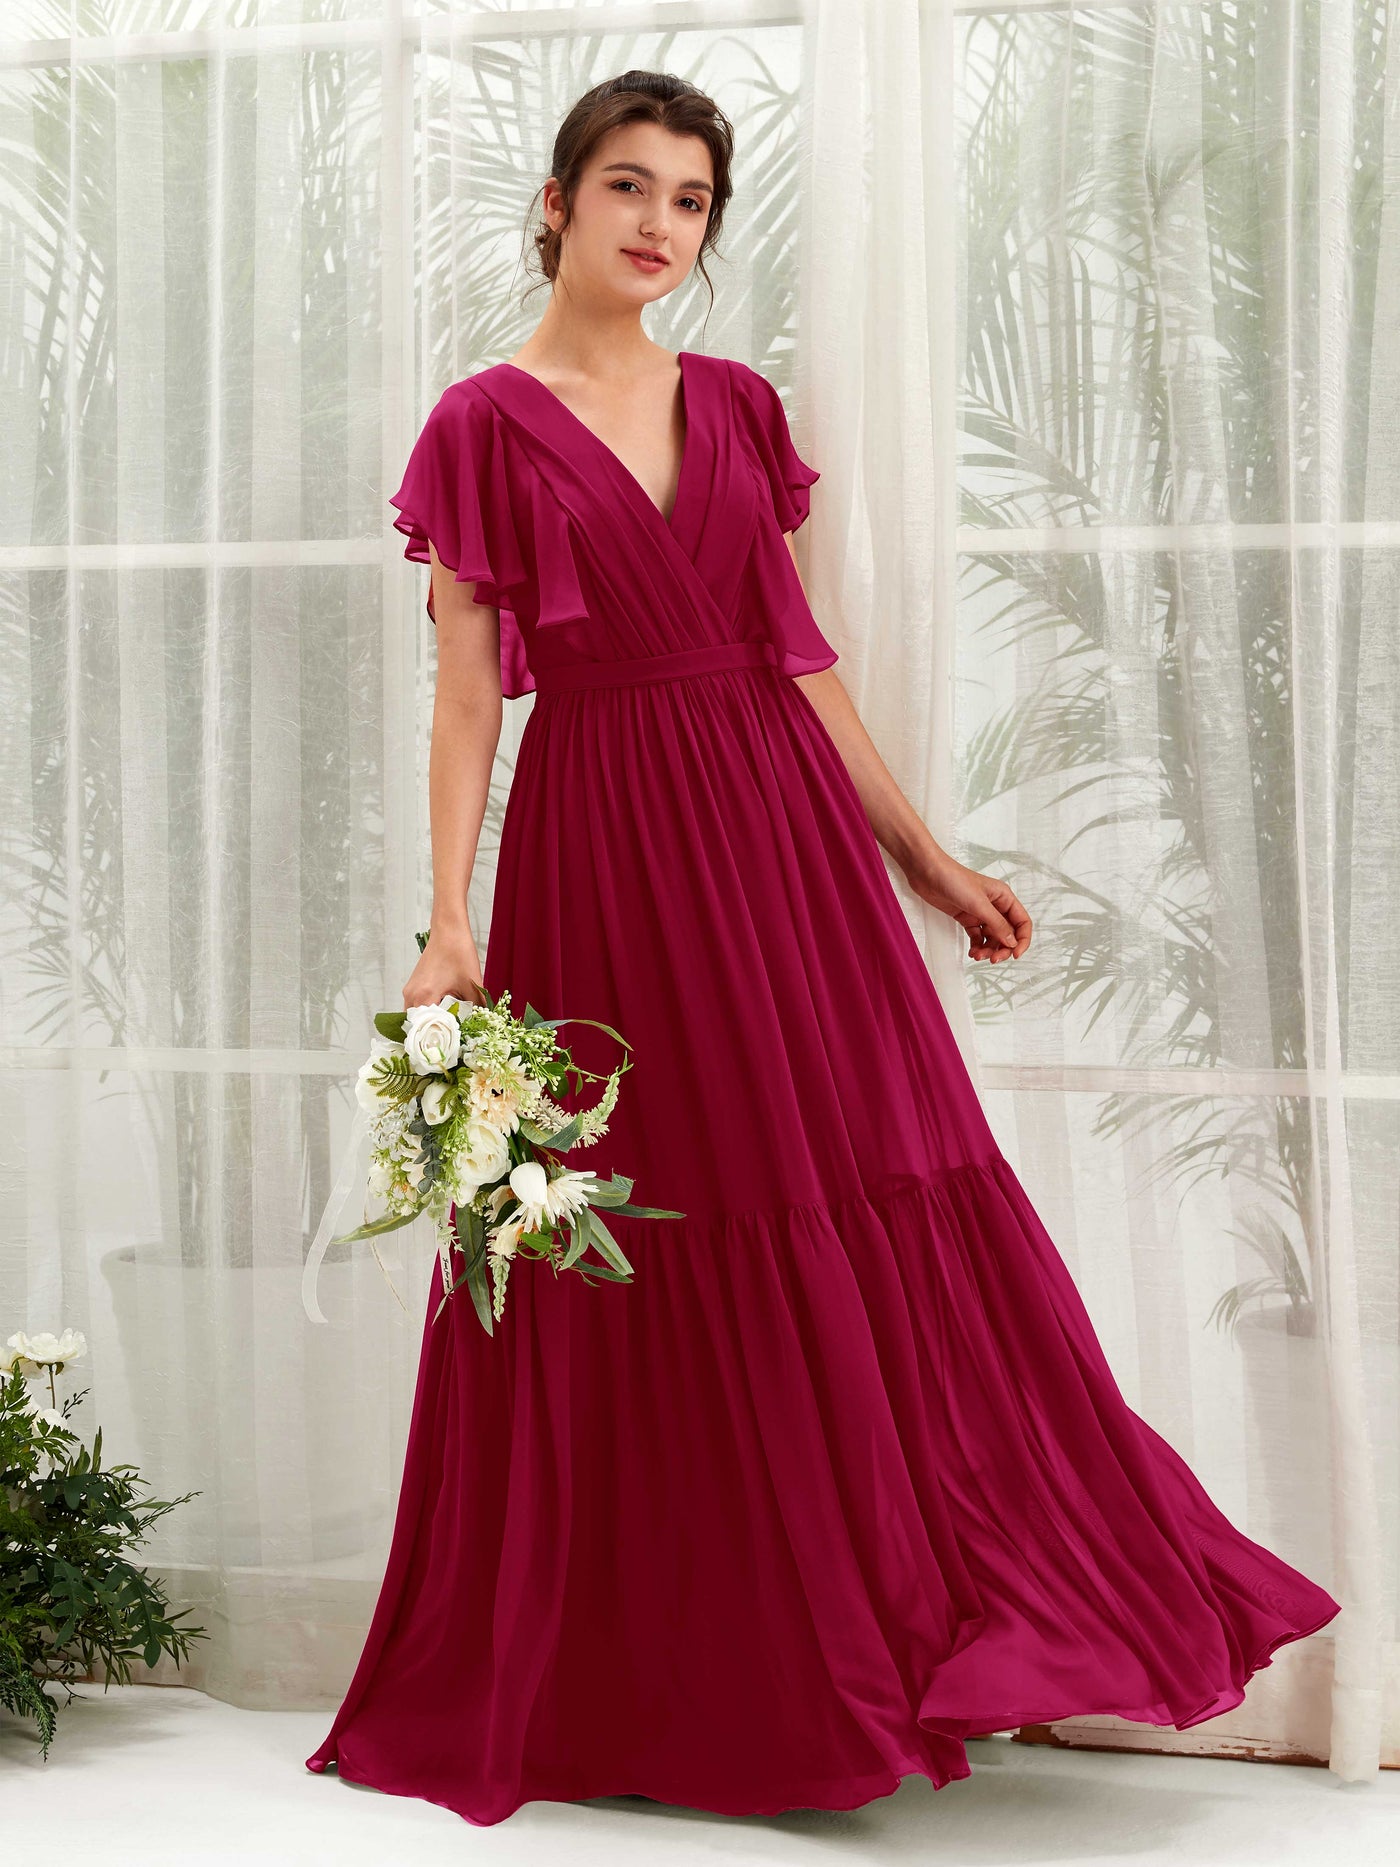 Jester Red Bridesmaid Dresses Bridesmaid Dress A-line Chiffon V-neck Full Length Short Sleeves Wedding Party Dress (81225941)#color_jester-red